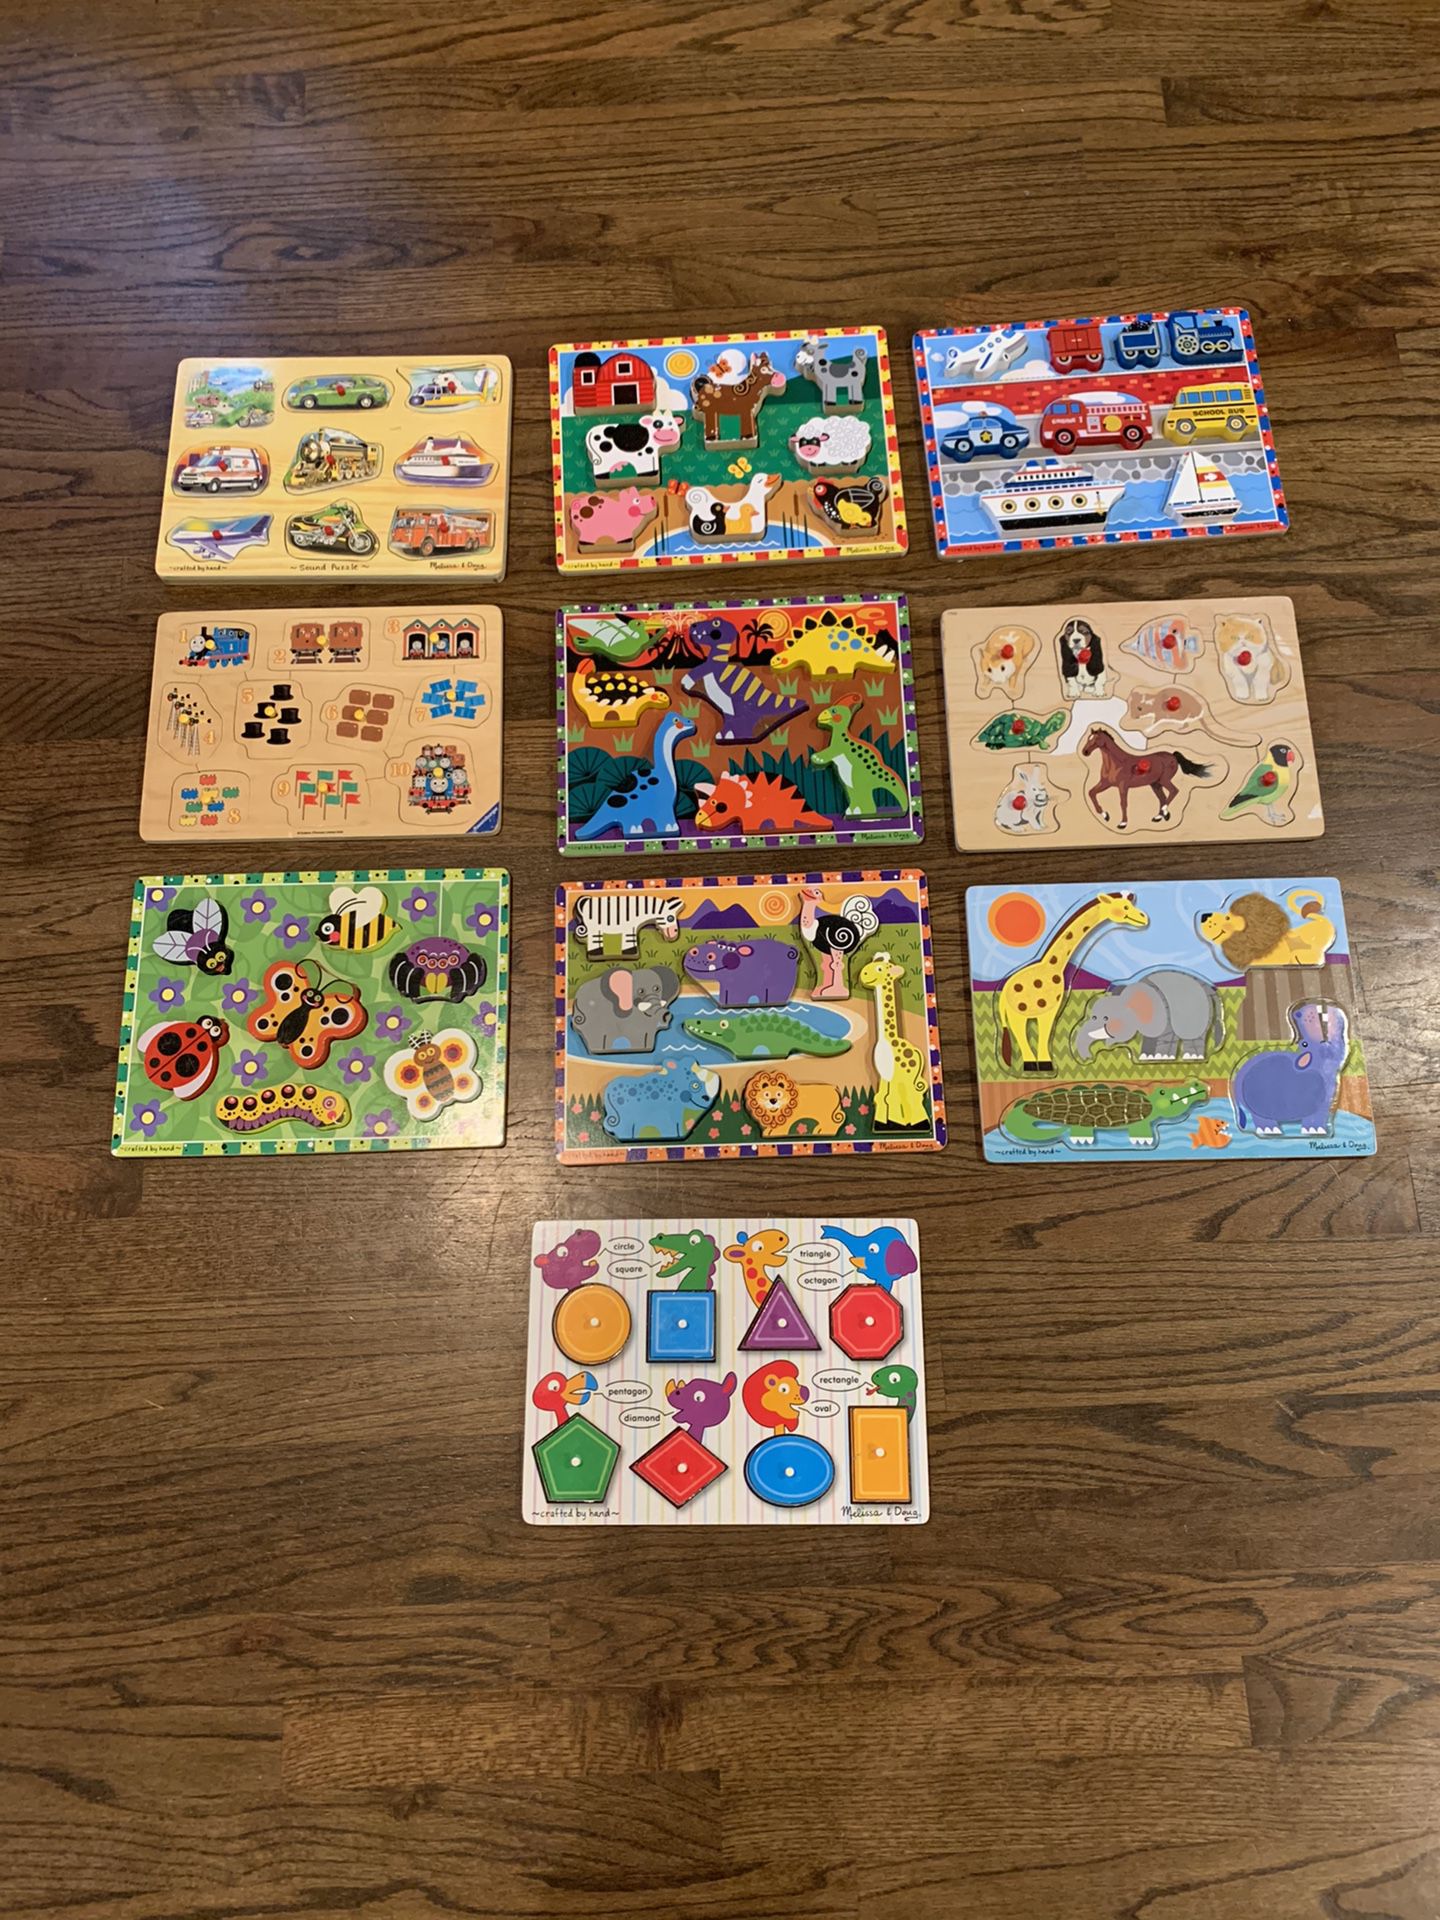 10 Wood Puzzles for $10